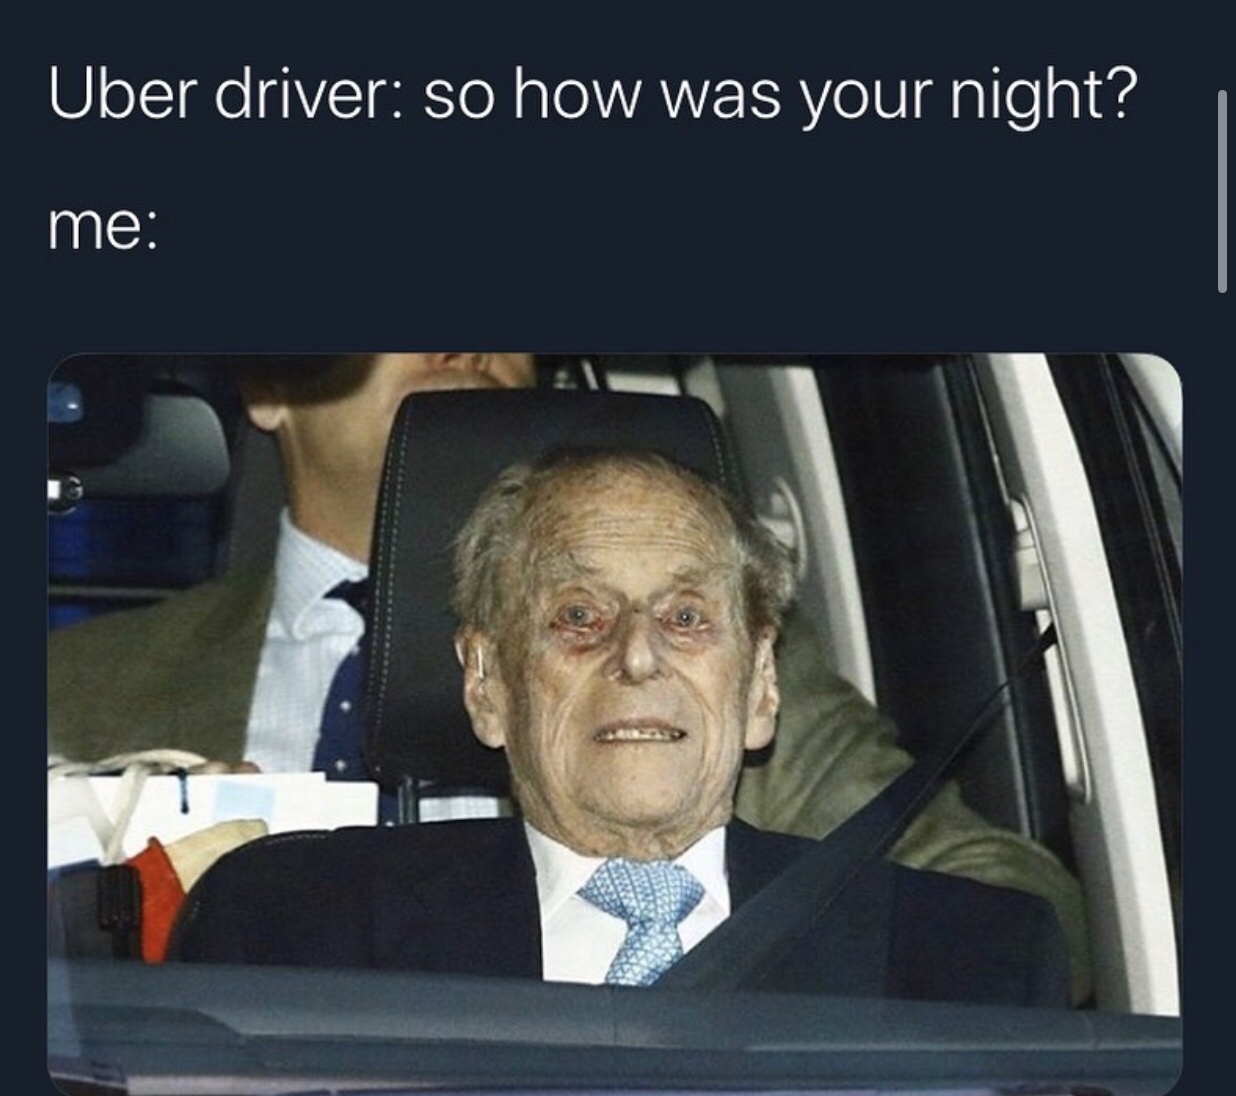 prince philip leaving hospital - Uber driver so how was your night? me